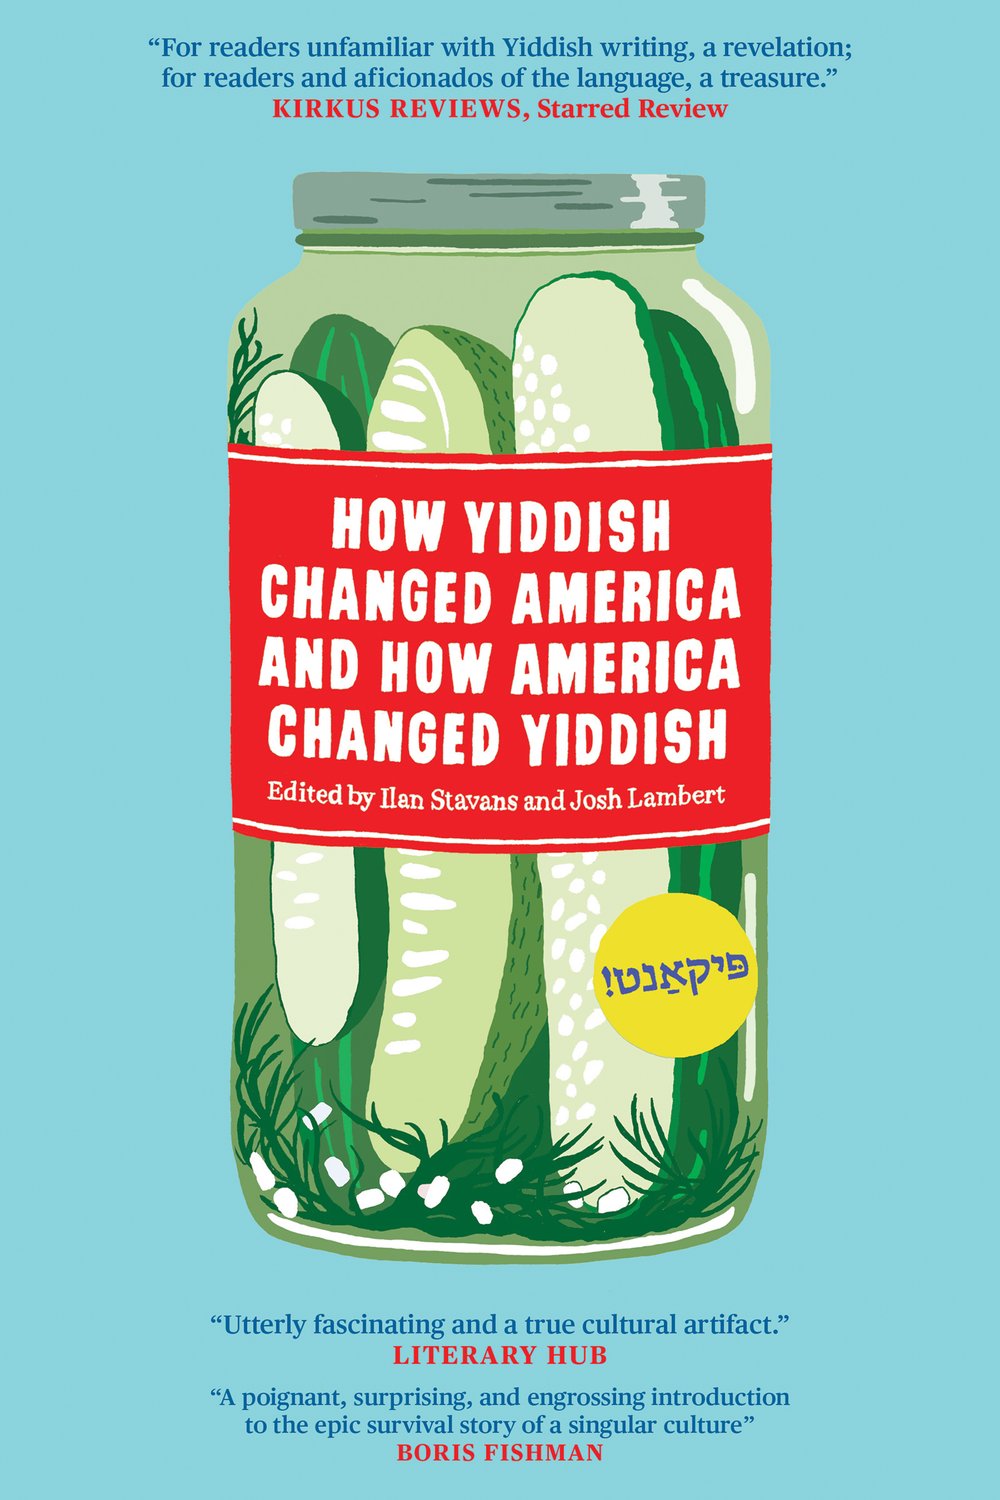 and　How　America　Restless　Yiddish　Yiddish　—　Books　Changed　How　America　Changed